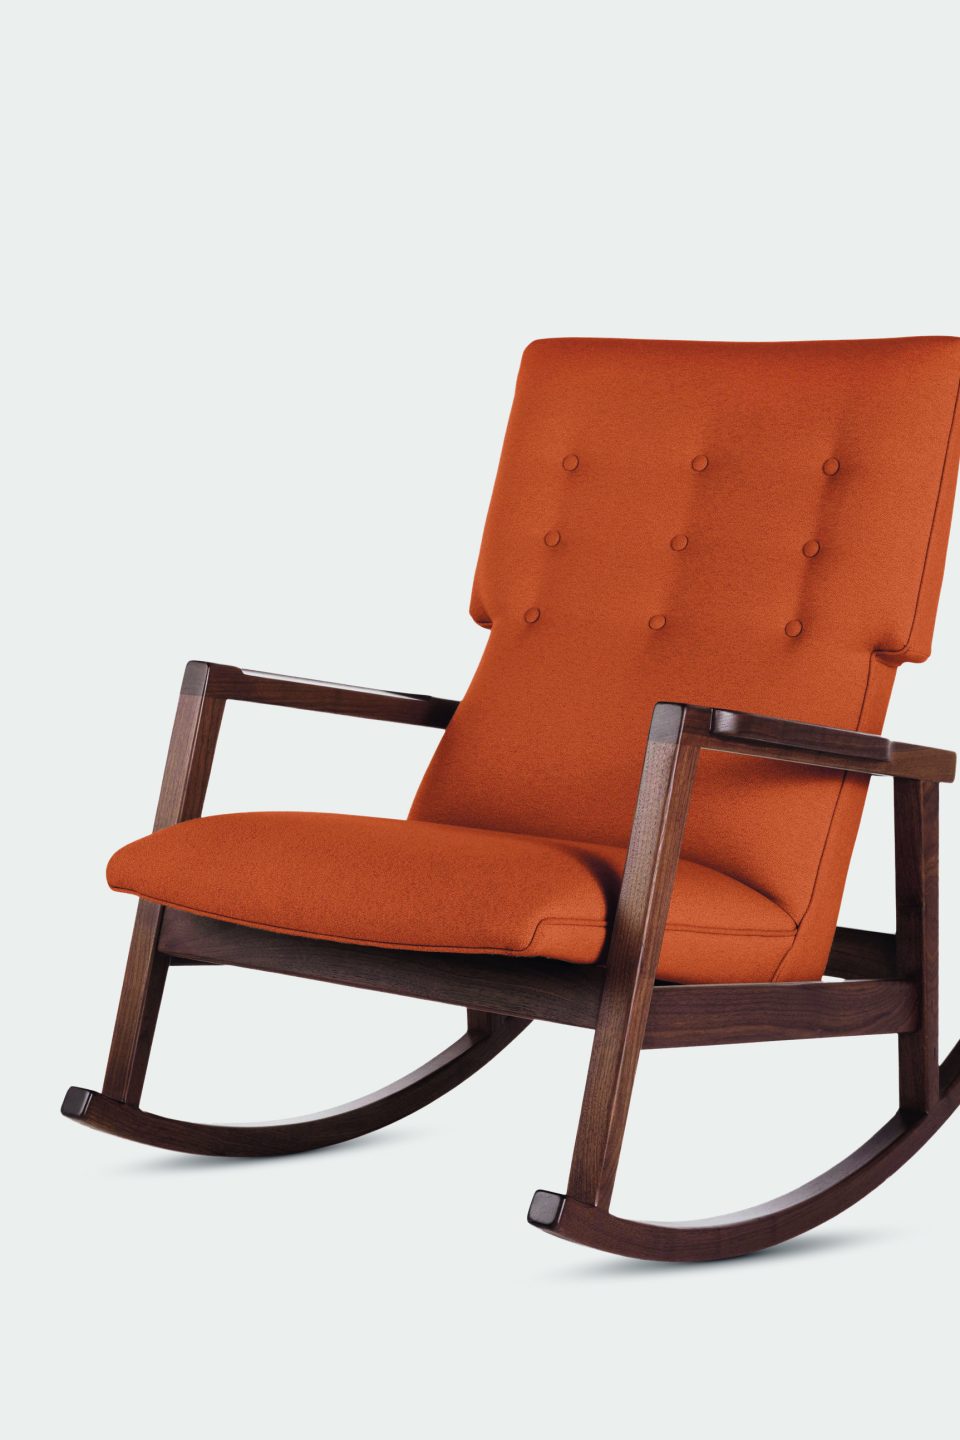 From Knoll to the Oval Office, Jens Risom Furthered Scandinavian Design in the States